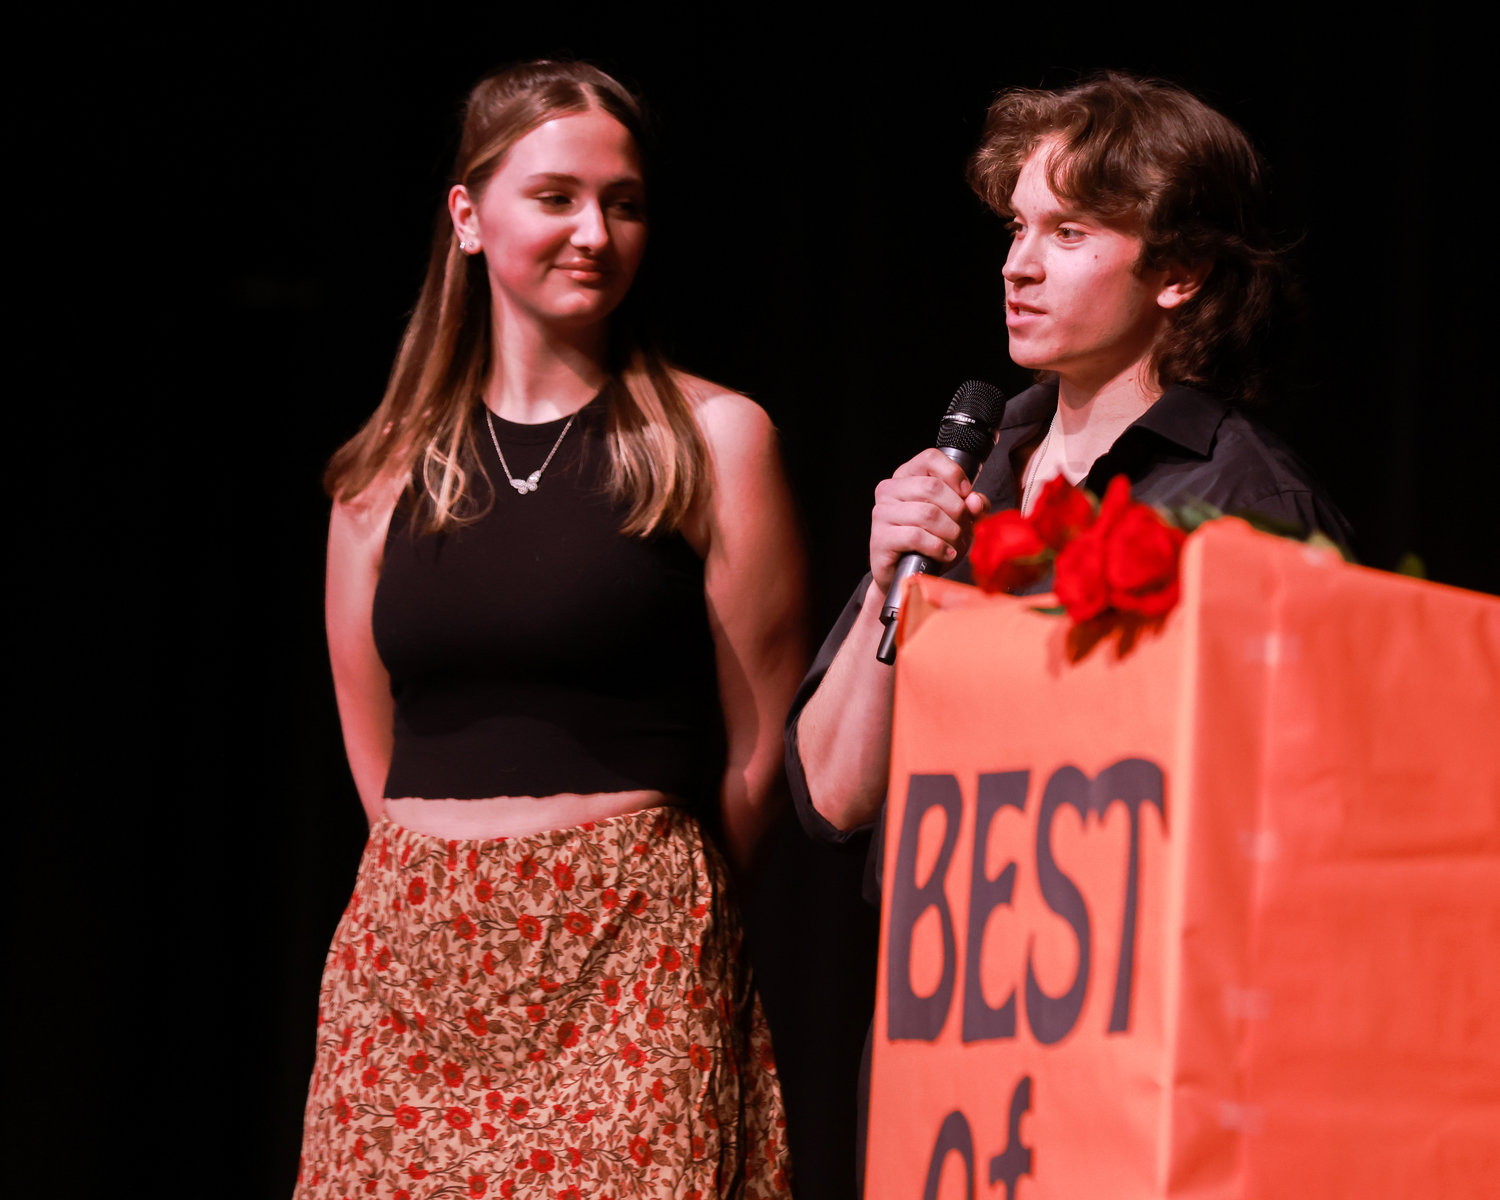 Contestant Ethan Valtierra brought out his girlfriend of six months, Brynn, as his companion during the formal wear portion of the Best of BG event at Battle Ground High School on Saturday, March 25.